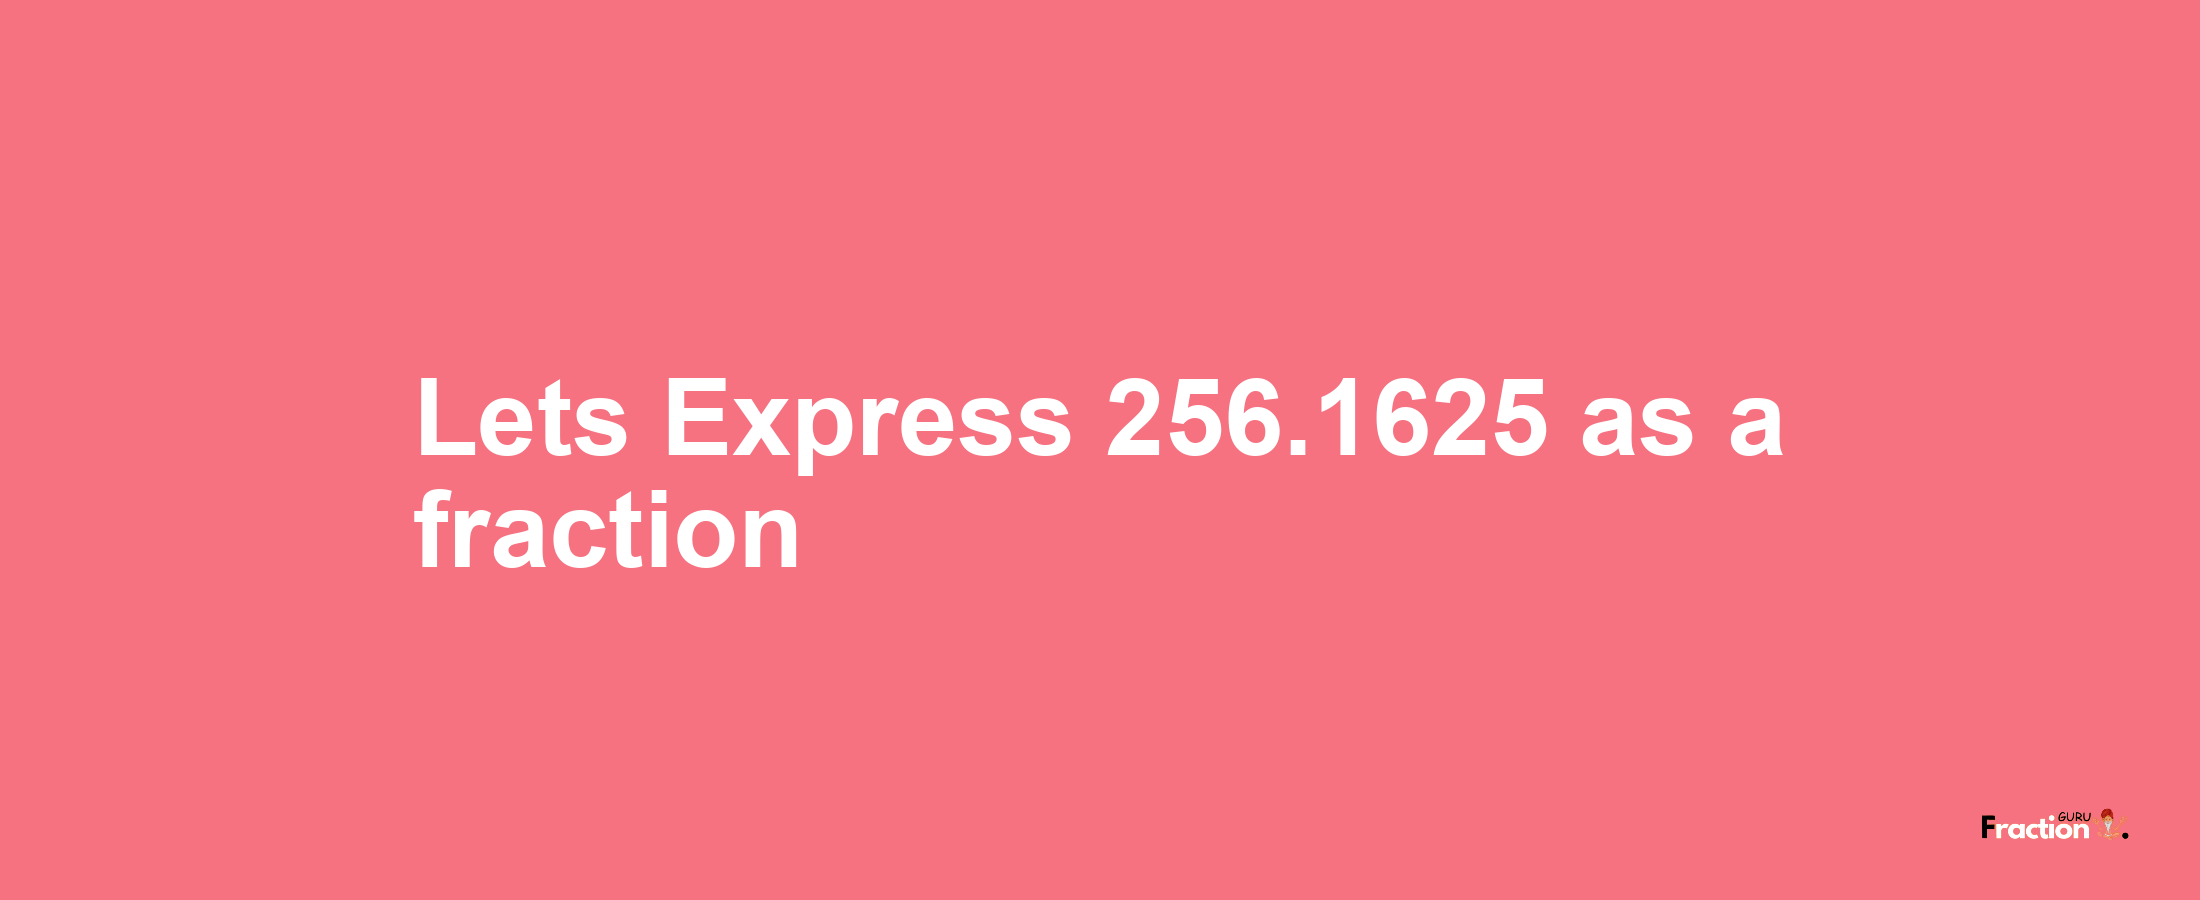 Lets Express 256.1625 as afraction